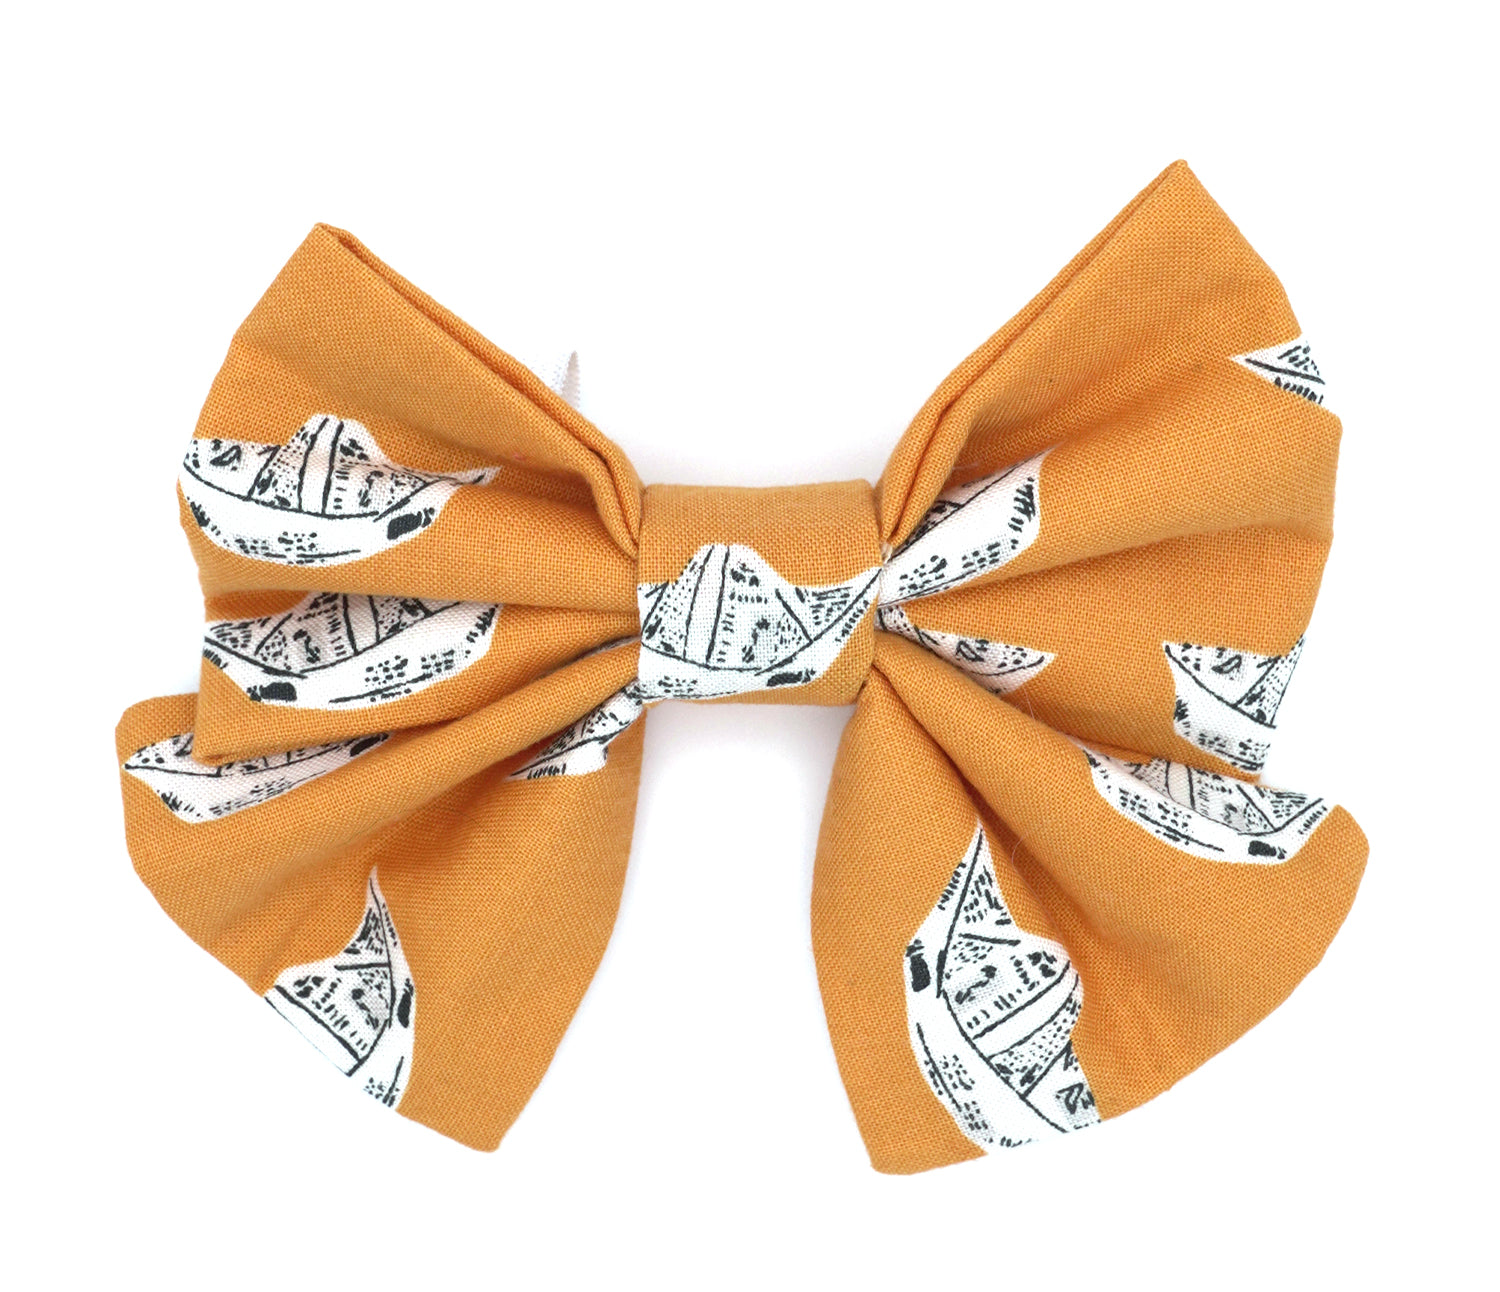 Handmade cotton bow tie with tails for dogs (or other pets). Elastic straps on back with snaps make it easy to add to collar, harness, or leash. Bright orange background with newsprint boats.